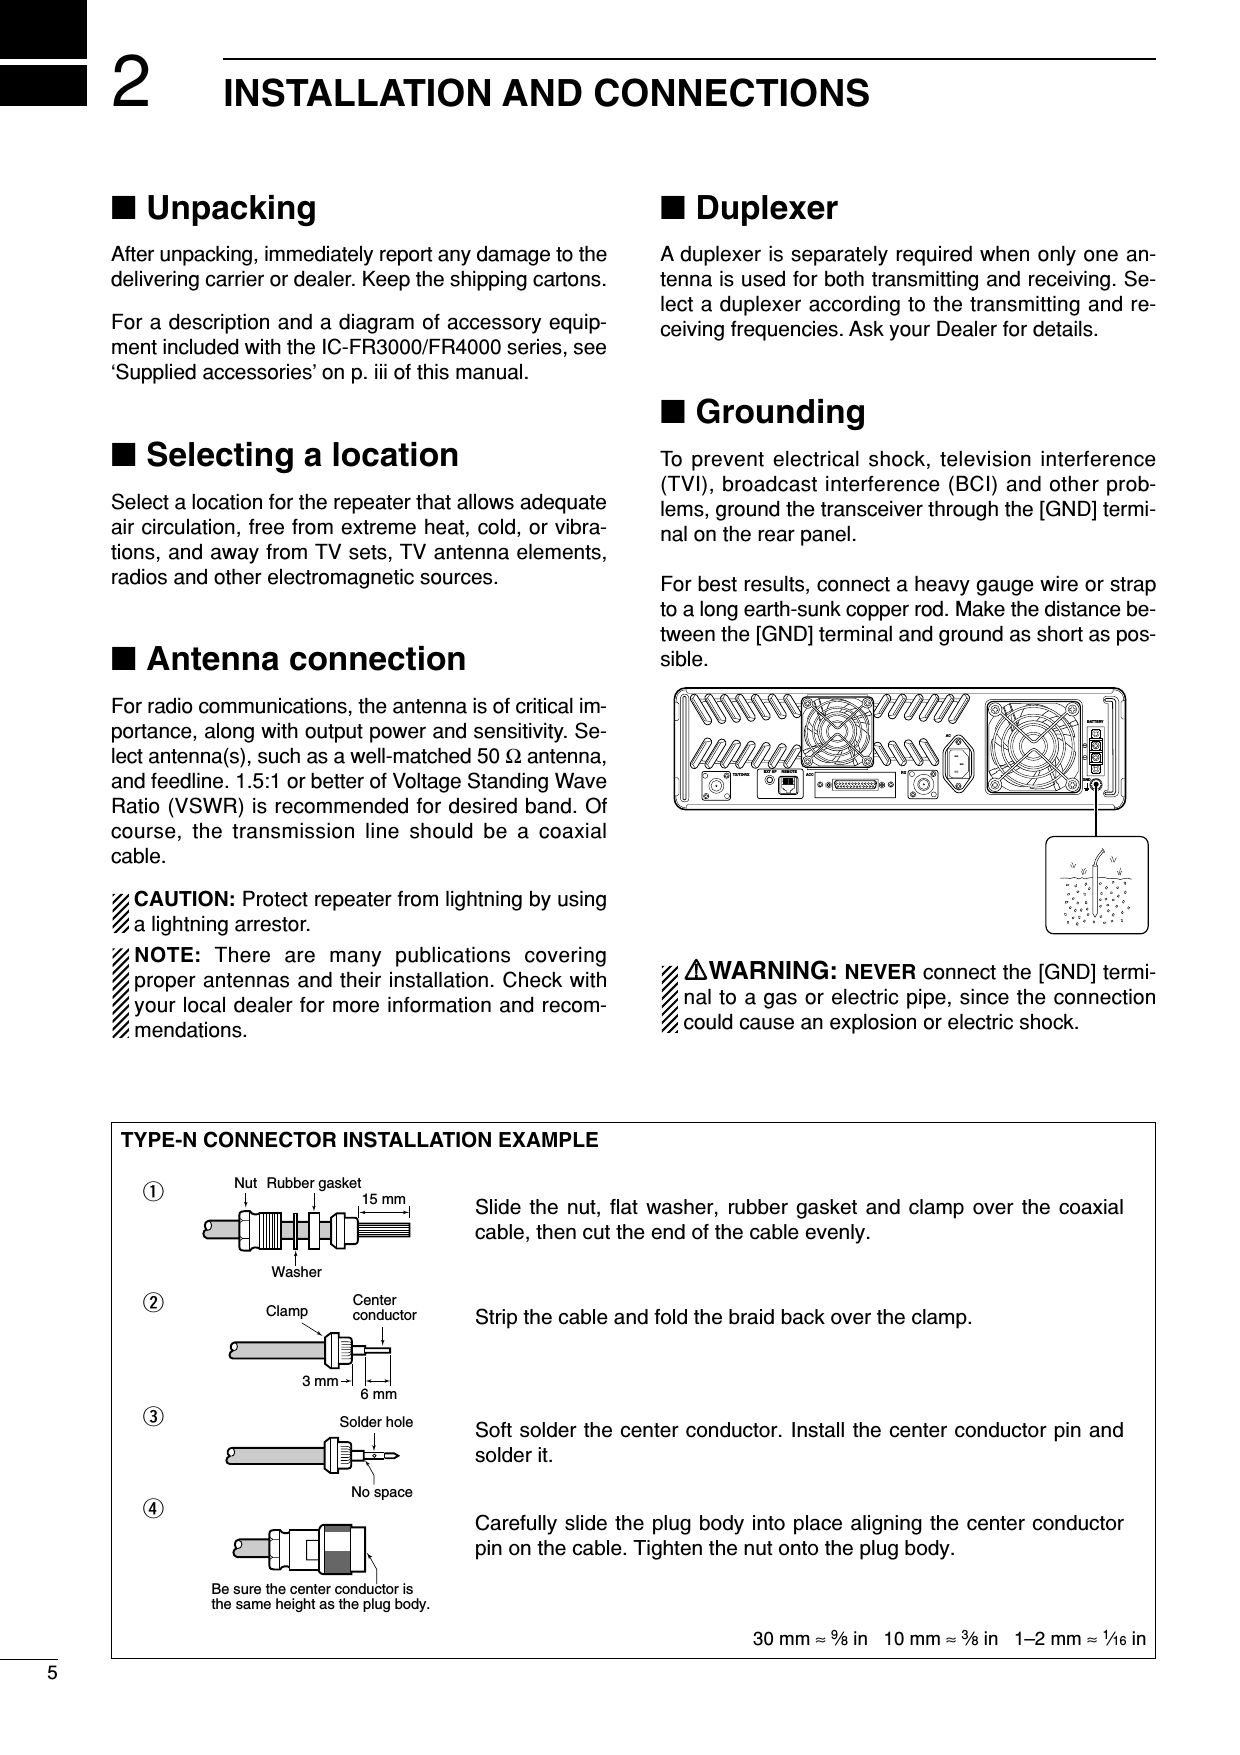 25INSTALLATION AND CONNECTIONS■UnpackingAfter unpacking, immediately report any damage to thedelivering carrier or dealer. Keep the shipping cartons.For a description and a diagram of accessory equip-ment included with the IC-FR3000/FR4000 series, see‘Supplied accessories’ on p. iii of this manual.■Selecting a locationSelect a location for the repeater that allows adequateair circulation, free from extreme heat, cold, or vibra-tions, and away from TV sets, TV antenna elements,radios and other electromagnetic sources.■Antenna connectionFor radio communications, the antenna is of critical im-portance, along with output power and sensitivity. Se-lect antenna(s), such as a well-matched 50 Ωantenna,and feedline. 1.5:1 or better of Voltage Standing WaveRatio (VSWR) is recommended for desired band. Ofcourse, the transmission line should be a coaxialcable.CAUTION: Protect repeater from lightning by usinga lightning arrestor.NOTE: There are many publications coveringproper antennas and their installation. Check withyour local dealer for more information and recom-mendations.■DuplexerA duplexer is separately required when only one an-tenna is used for both transmitting and receiving. Se-lect a duplexer according to the transmitting and re-ceiving frequencies. Ask your Dealer for details.■GroundingTo prevent electrical shock, television interference(TVI), broadcast interference (BCI) and other prob-lems, ground the transceiver through the [GND] termi-nal on the rear panel.For best results, connect a heavy gauge wire or strapto a long earth-sunk copper rod. Make the distance be-tween the [GND] terminal and ground as short as pos-sible.RRWARNING: NEVER connect the [GND] termi-nal to a gas or electric pipe, since the connectioncould cause an explosion or electric shock.TX/TX•RXEXT SP REMOTEACC RXGNDACBATTERYTYPE-N CONNECTOR INSTALLATION EXAMPLE30 mm ≈9⁄8in   10 mm ≈3⁄8in   1–2 mm ≈1⁄16 inSlide the nut, flat washer, rubber gasket and clamp over the coaxial cable, then cut the end of the cable evenly.Strip the cable and fold the braid back over the clamp.Soft solder the center conductor. Install the center conductor pin and solder it.Carefully slide the plug body into place aligning the center conductor pin on the cable. Tighten the nut onto the plug body.qwer15 mm3 mm 6 mmNo spaceSolder holeBe sure the center conductor is the same height as the plug body.Clamp CenterconductorWasherNut Rubber gasket